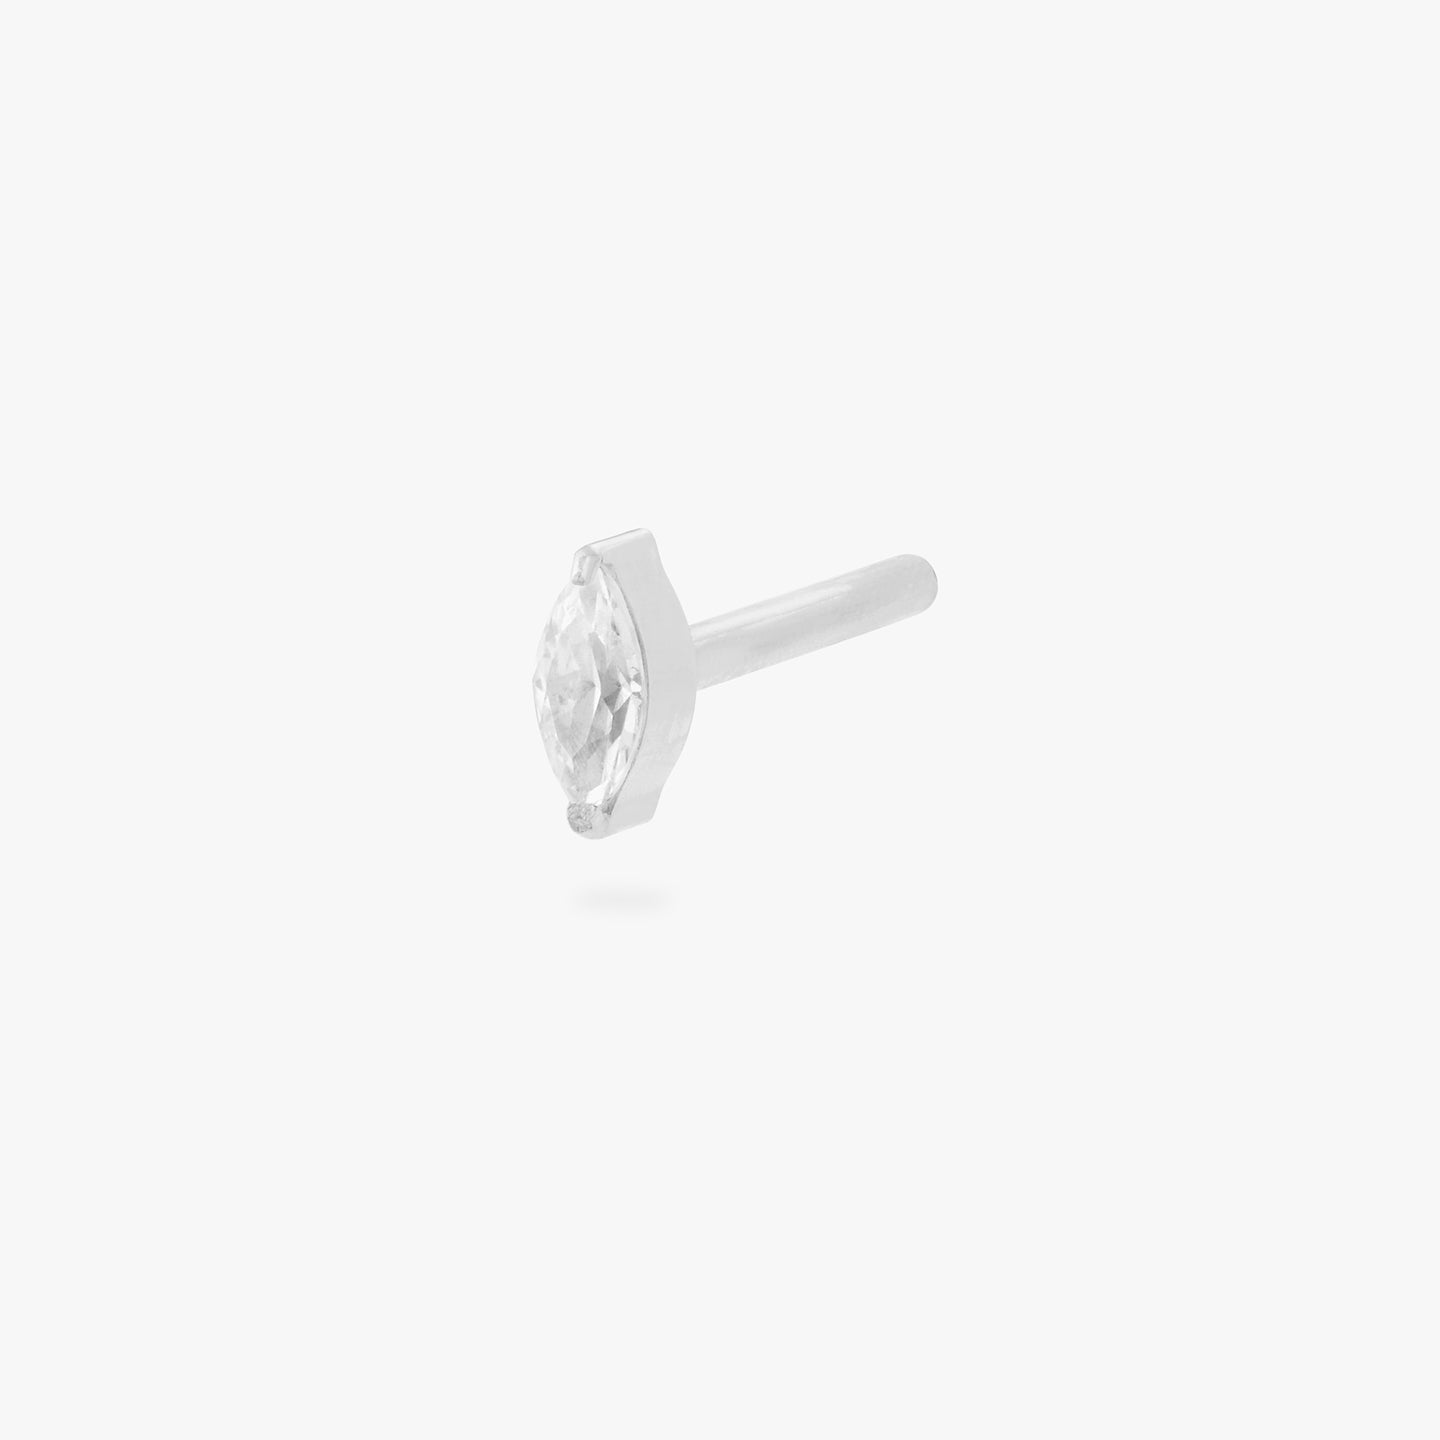 This is an image of a 6mm length silver/clear flatback post with a marquise-shaped CZ disc. [hover] color:null|8mm